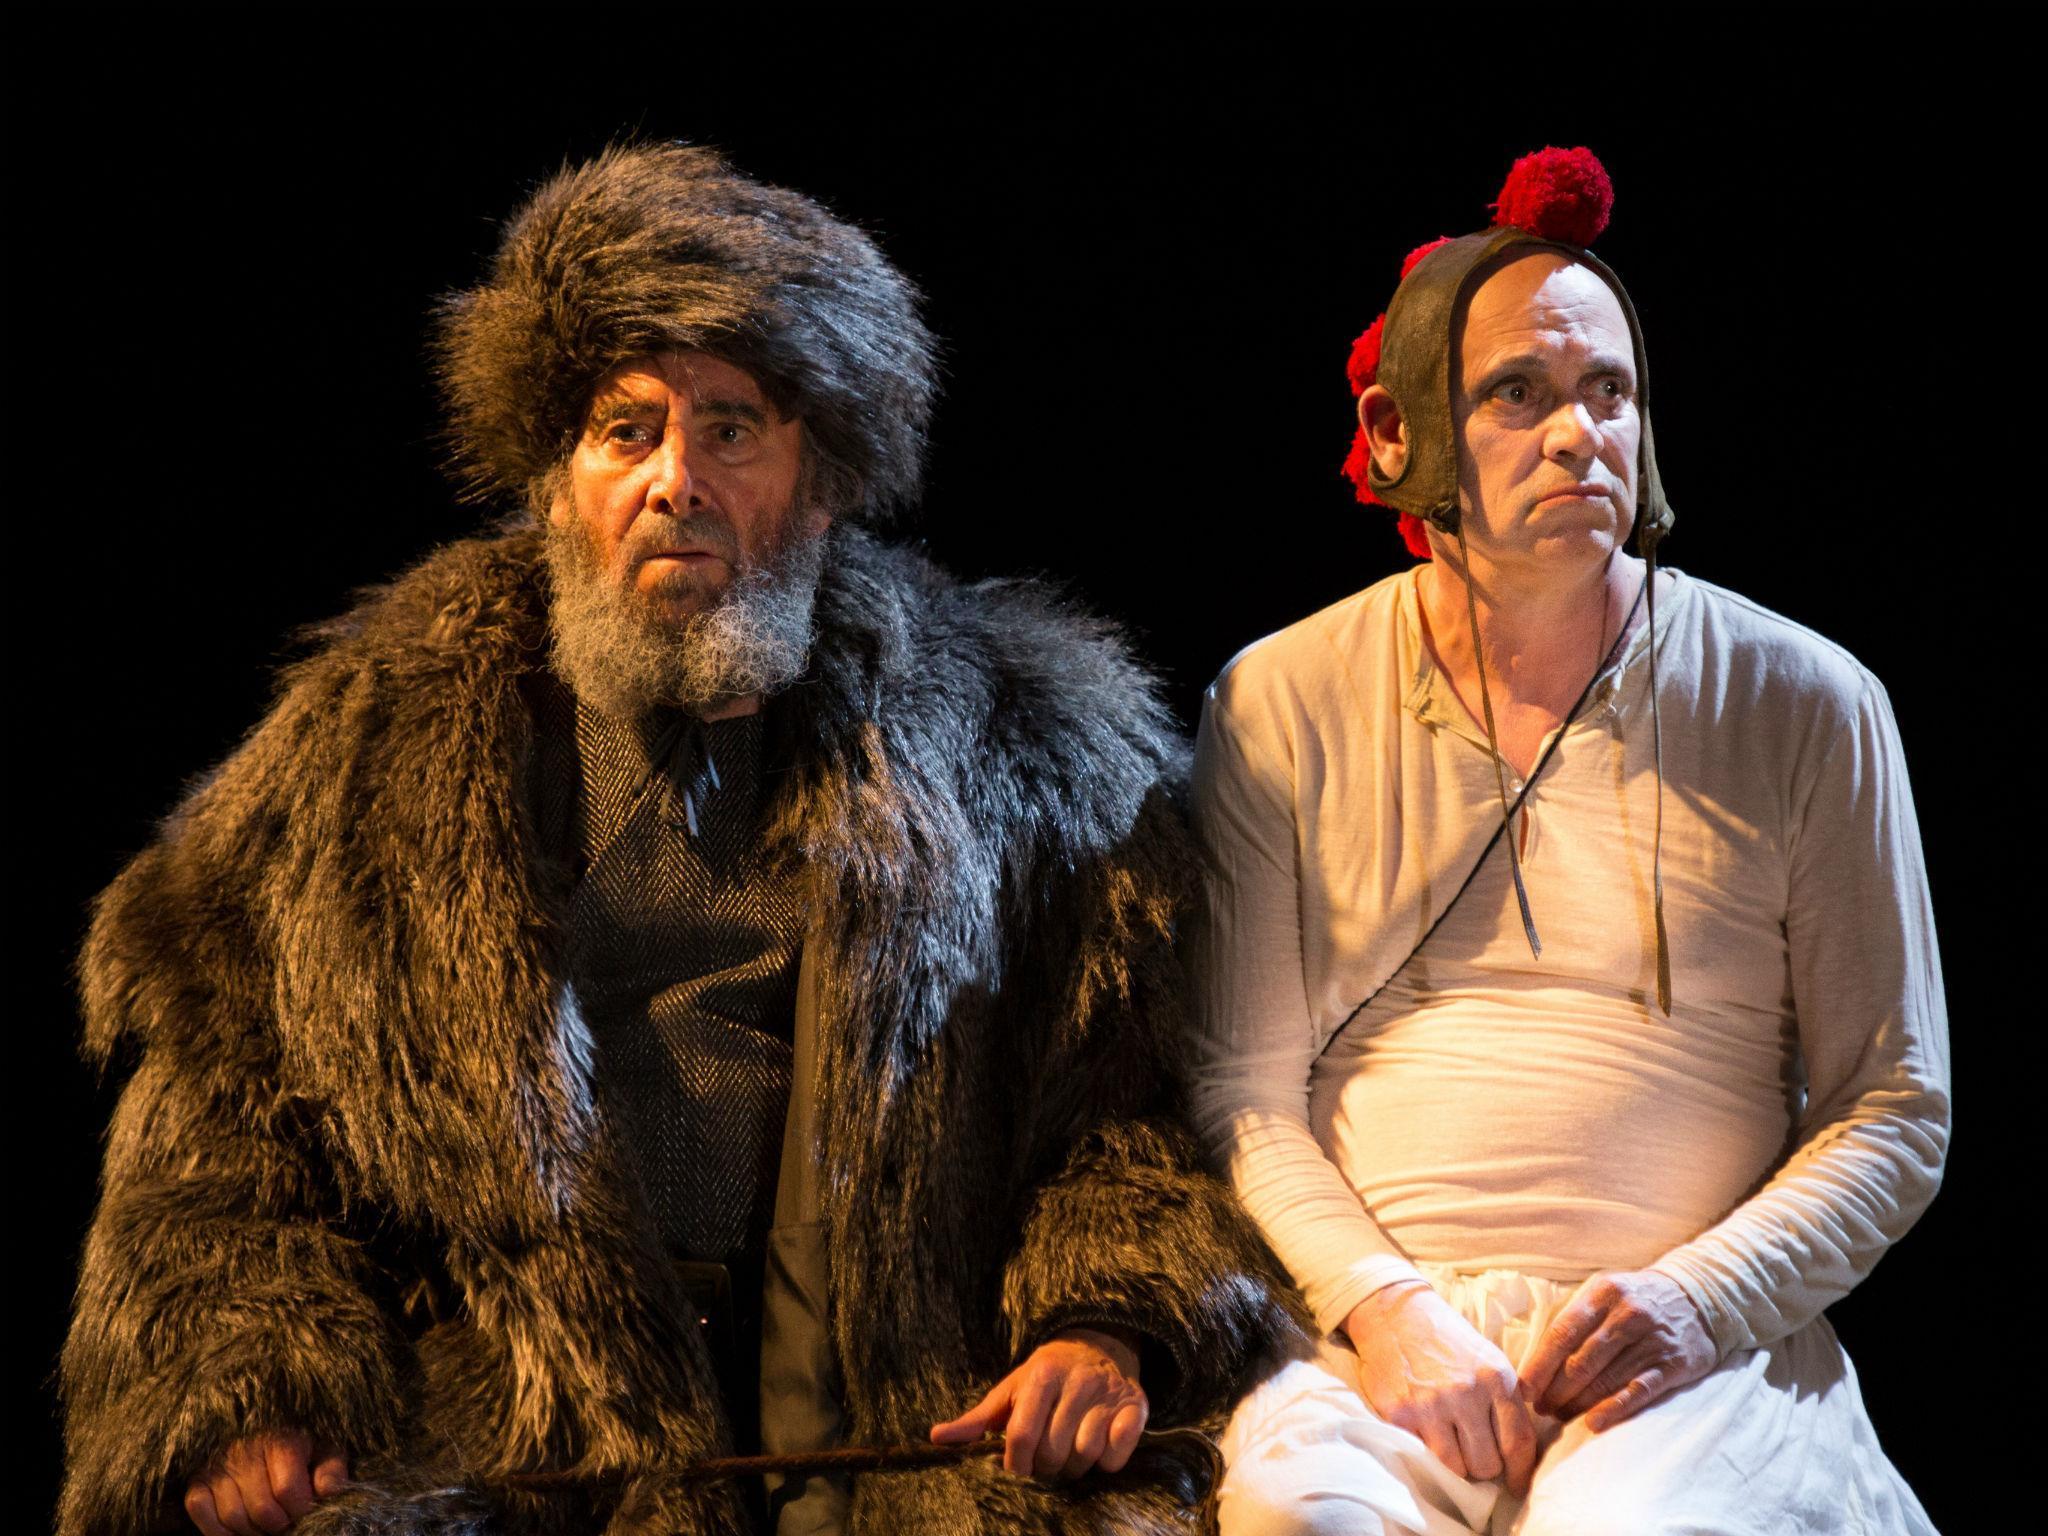 Antony Sher as King Lear and Graham Turner as The Fool in King Lear at the Royal Shakespeare Theatre